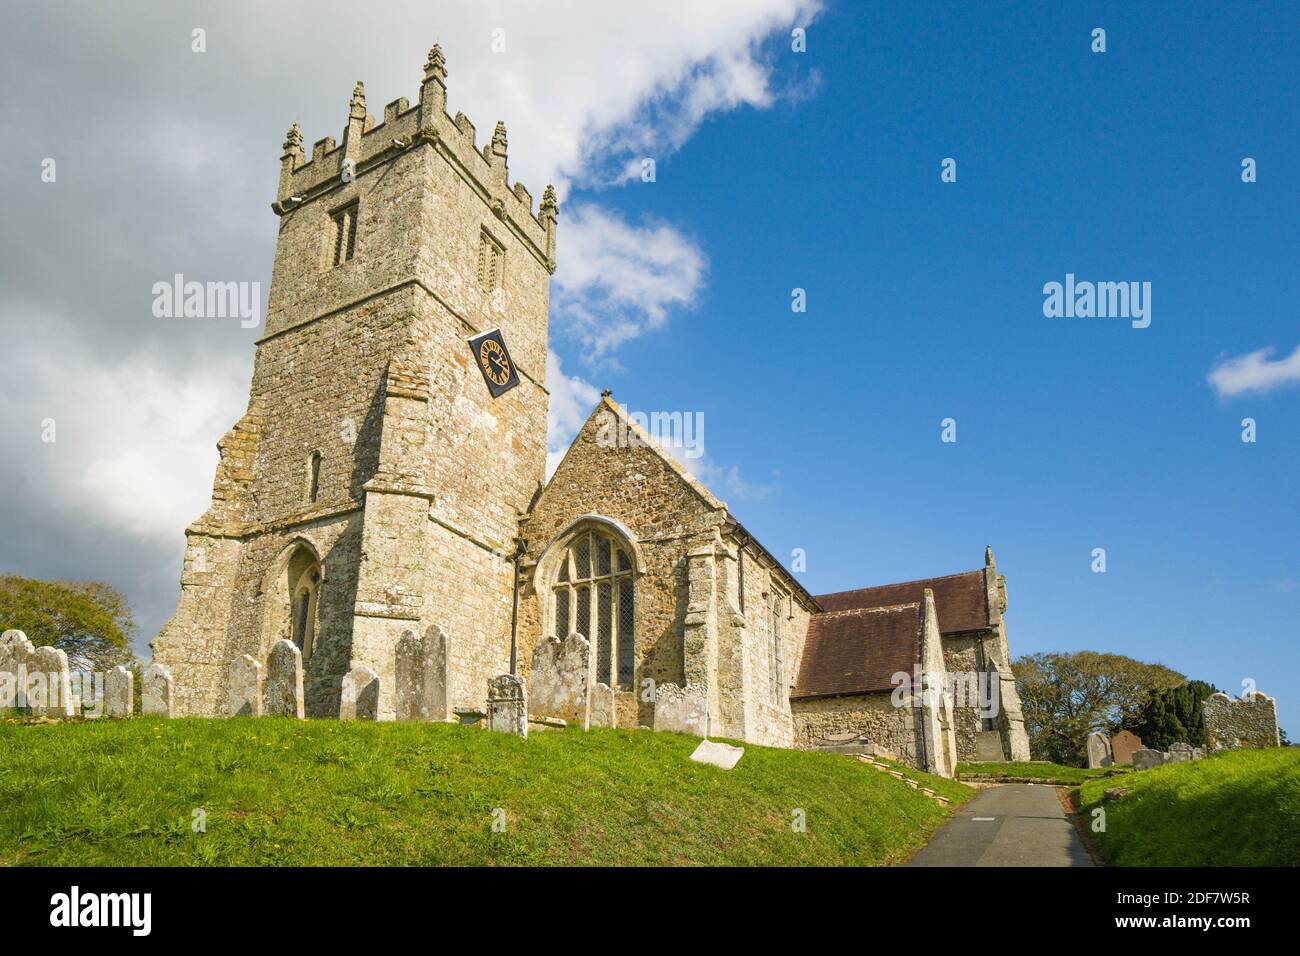 All Saints Church in the picturesque village of Godshill Isle of Wight UK. October 2020. Stock Photo